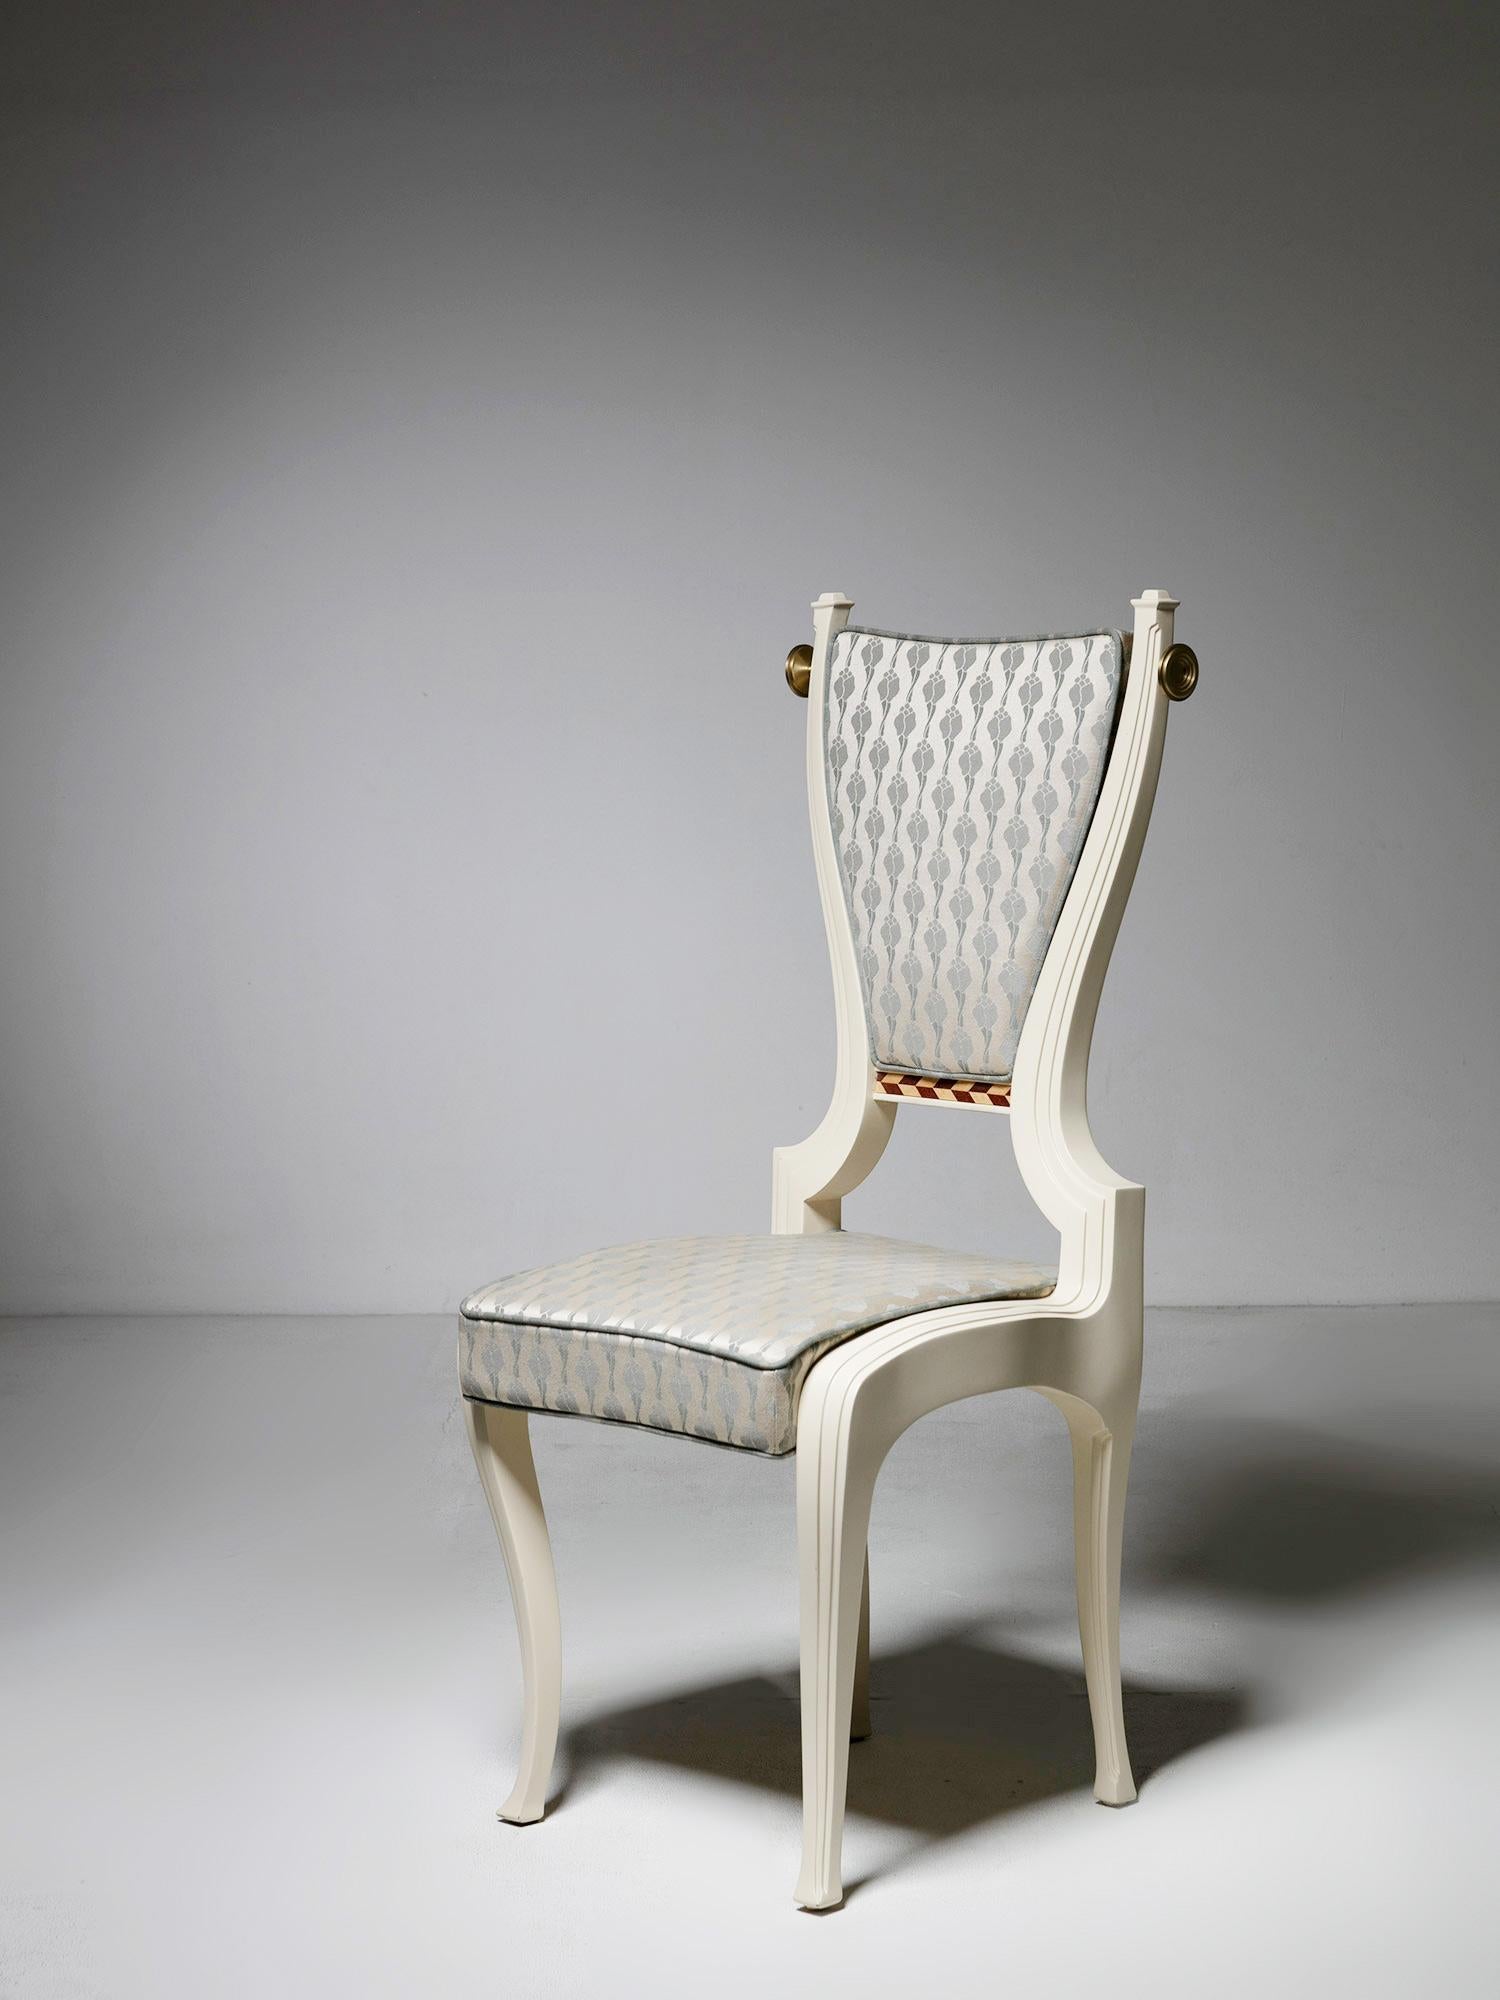 Rare chair designed by Paolo Portoghesi for B&B Italia.
Part of the 